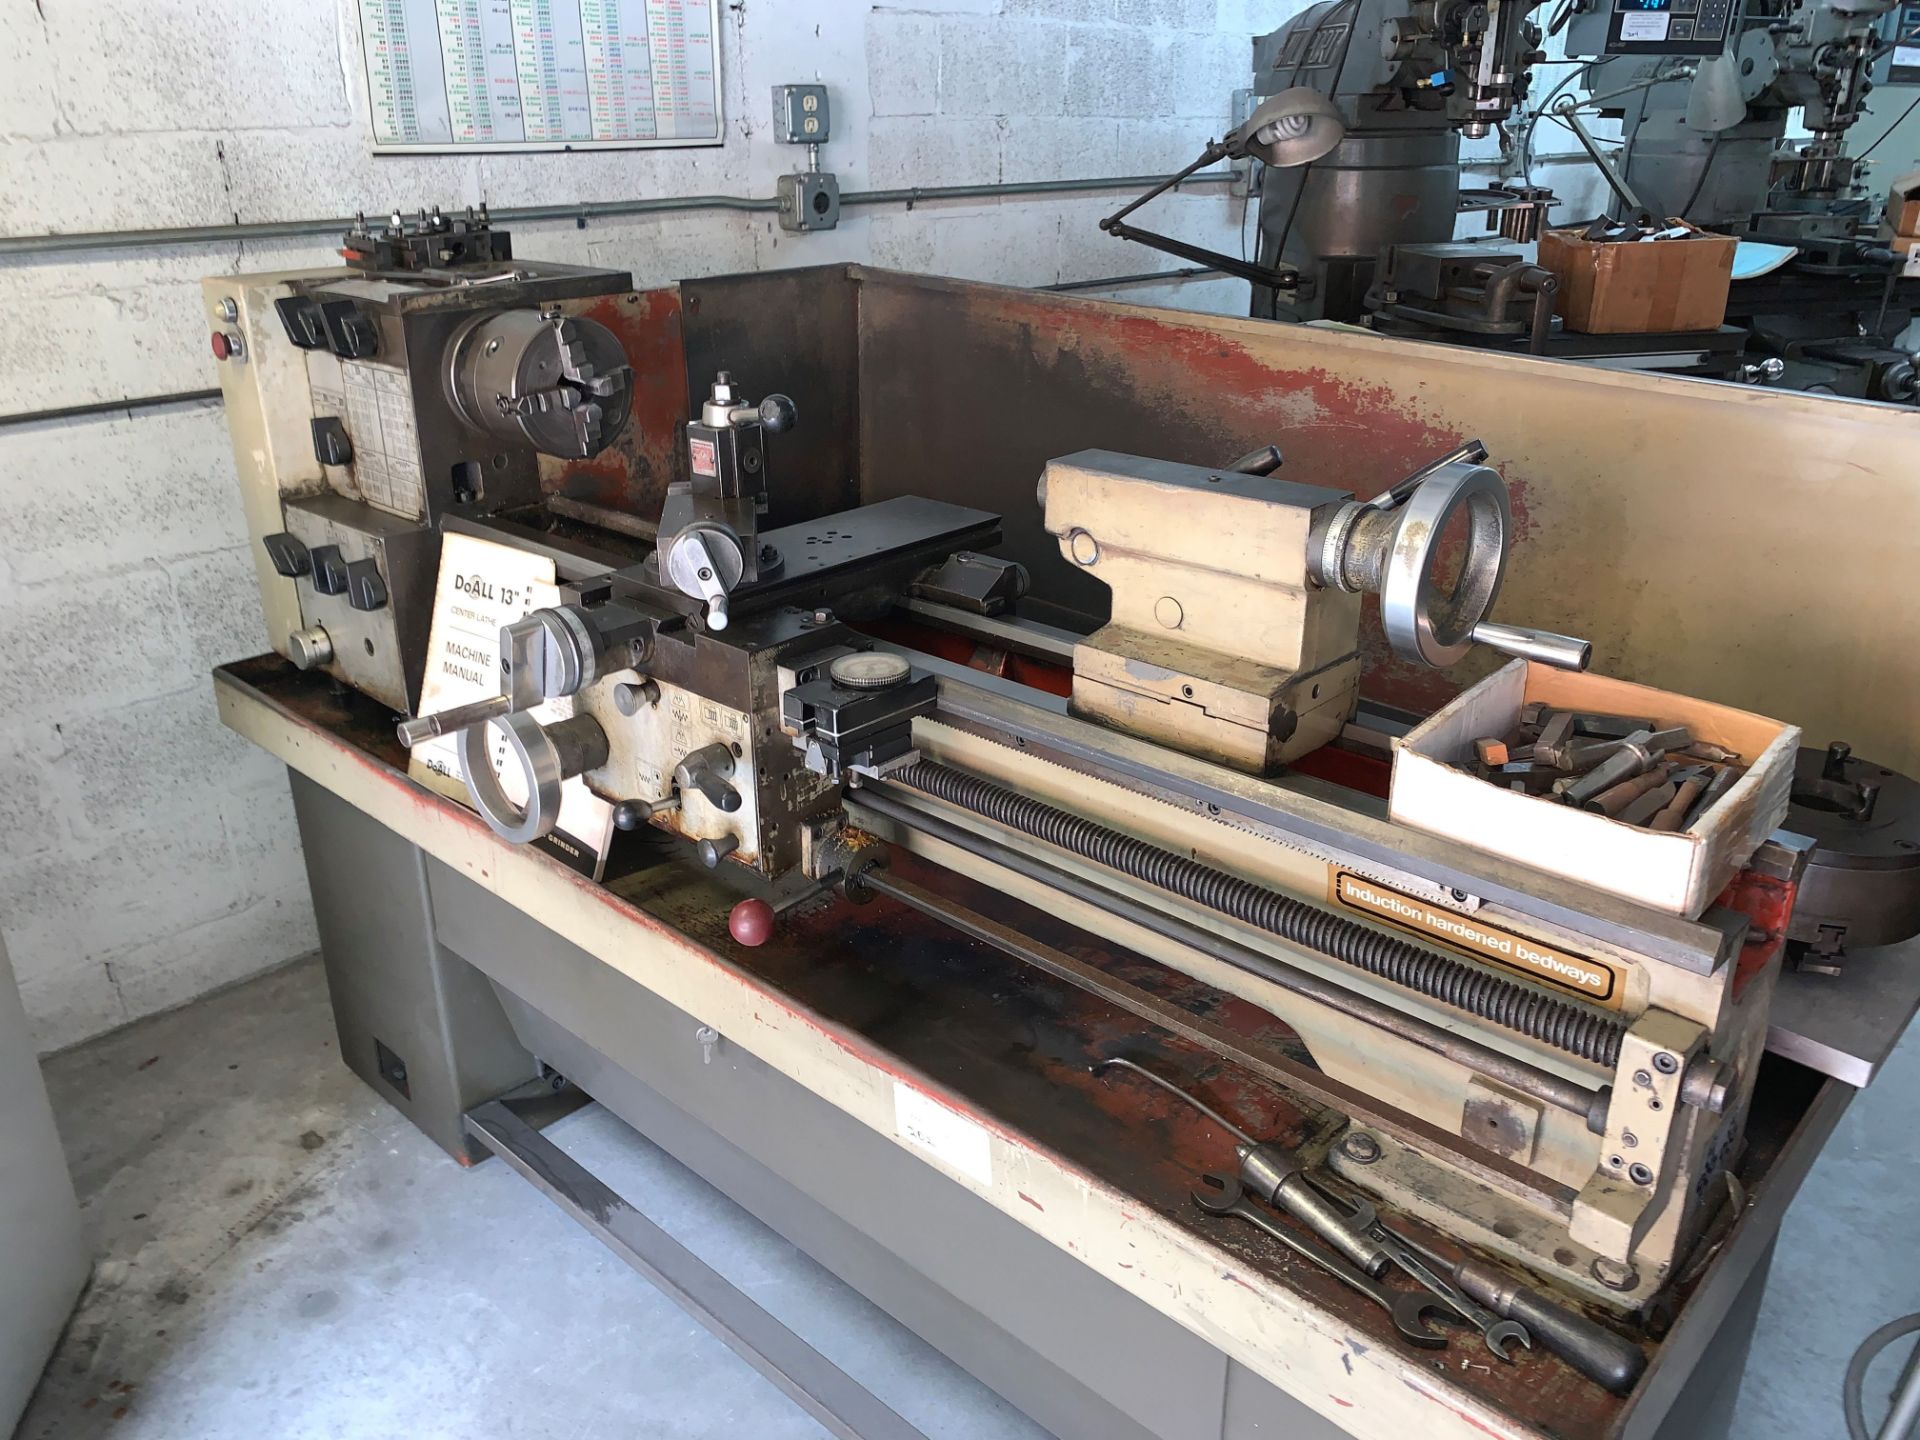 Do-Al 13" Center Lathe, 48" Bed, 4 & 3 Jaw Chucks, Steady Rest, Tool Post, Collets - Image 2 of 5